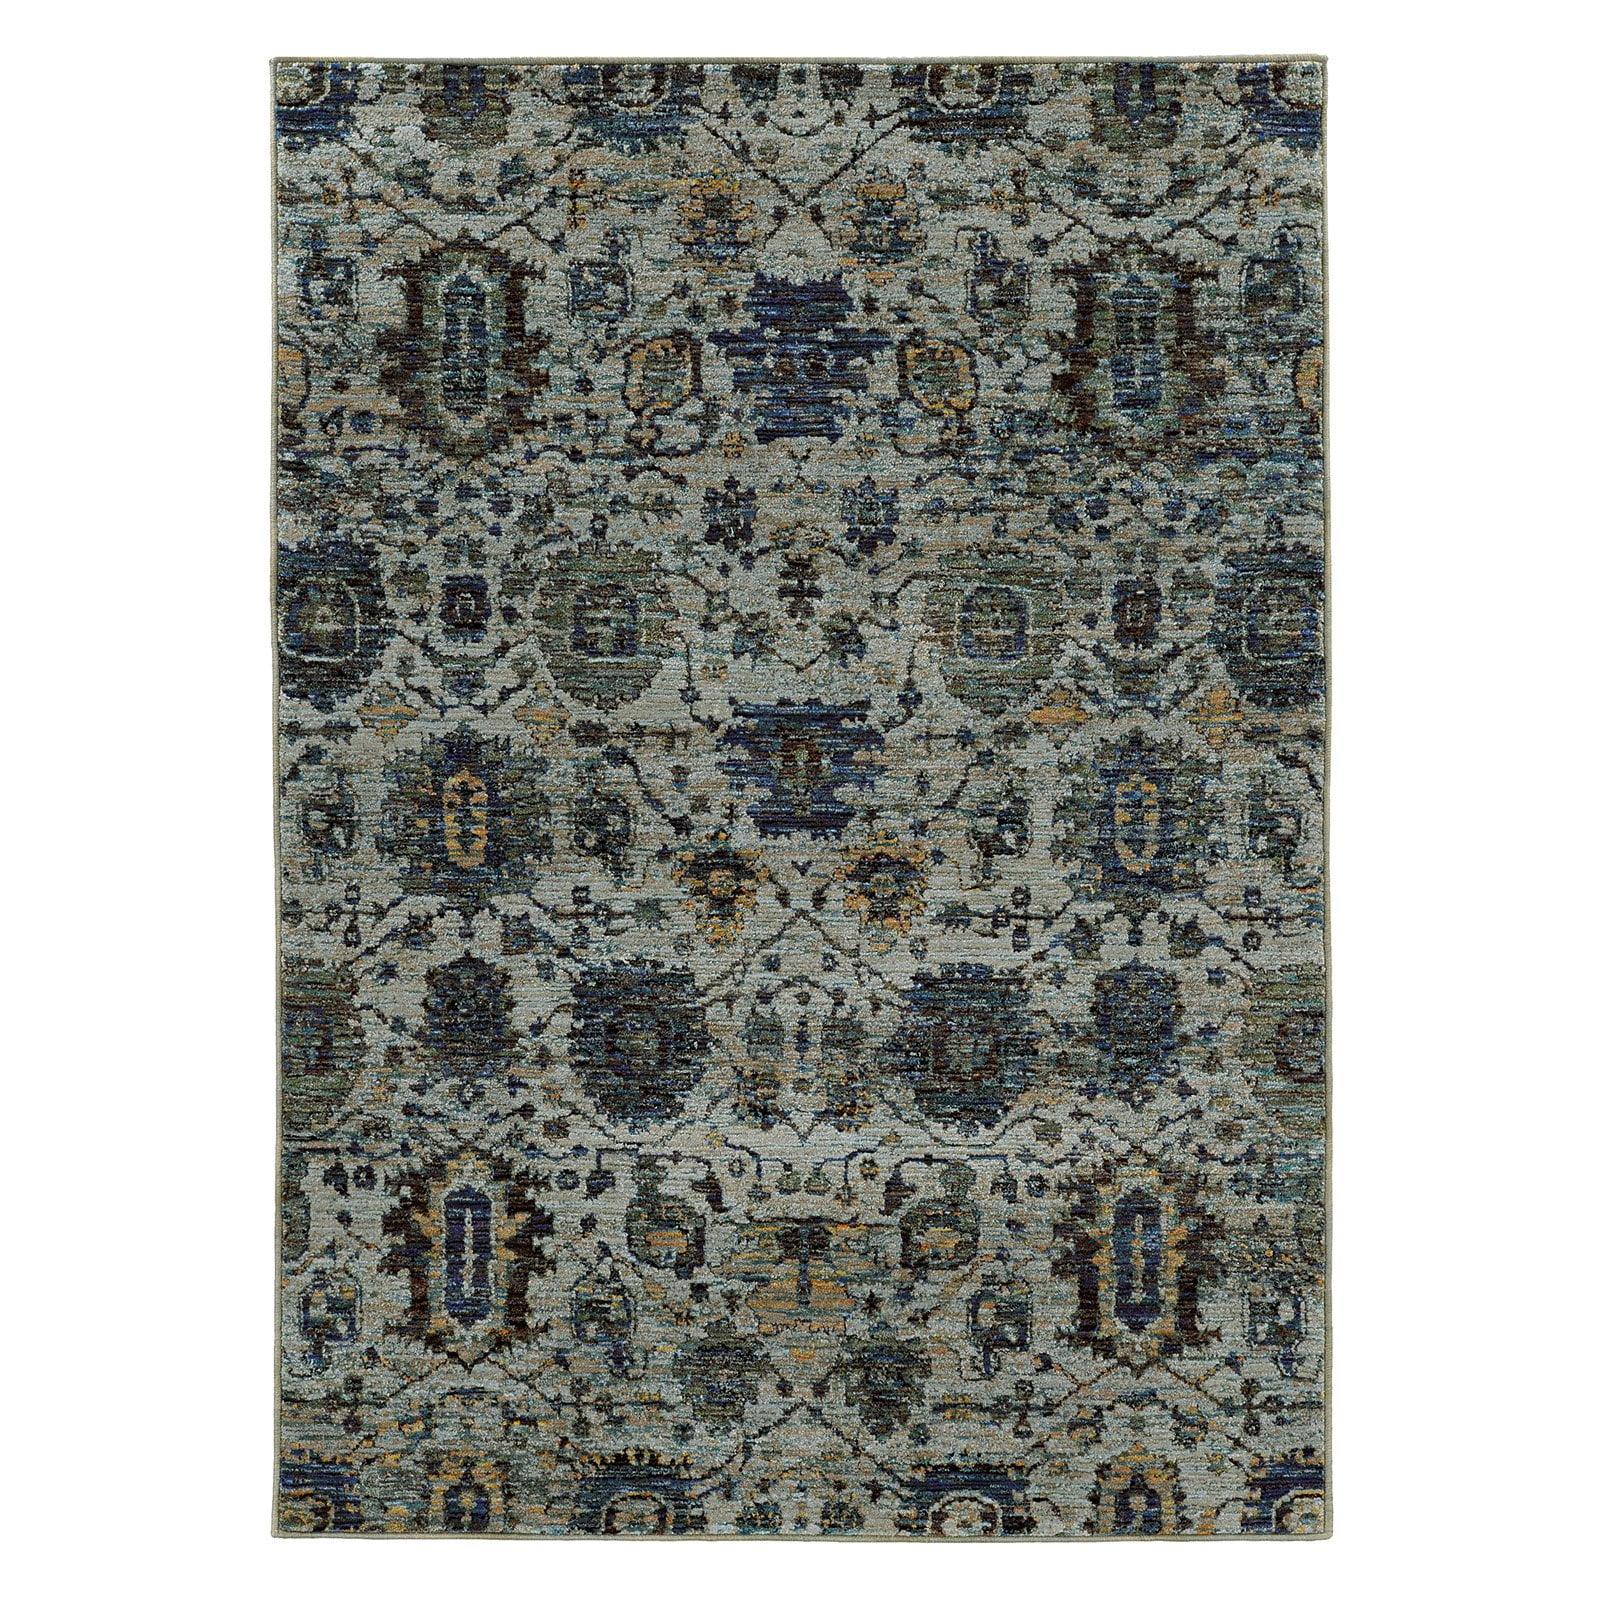 Luxurious Andorra Over-Dyed Blue Synthetic Area Rug, 63" x 87"